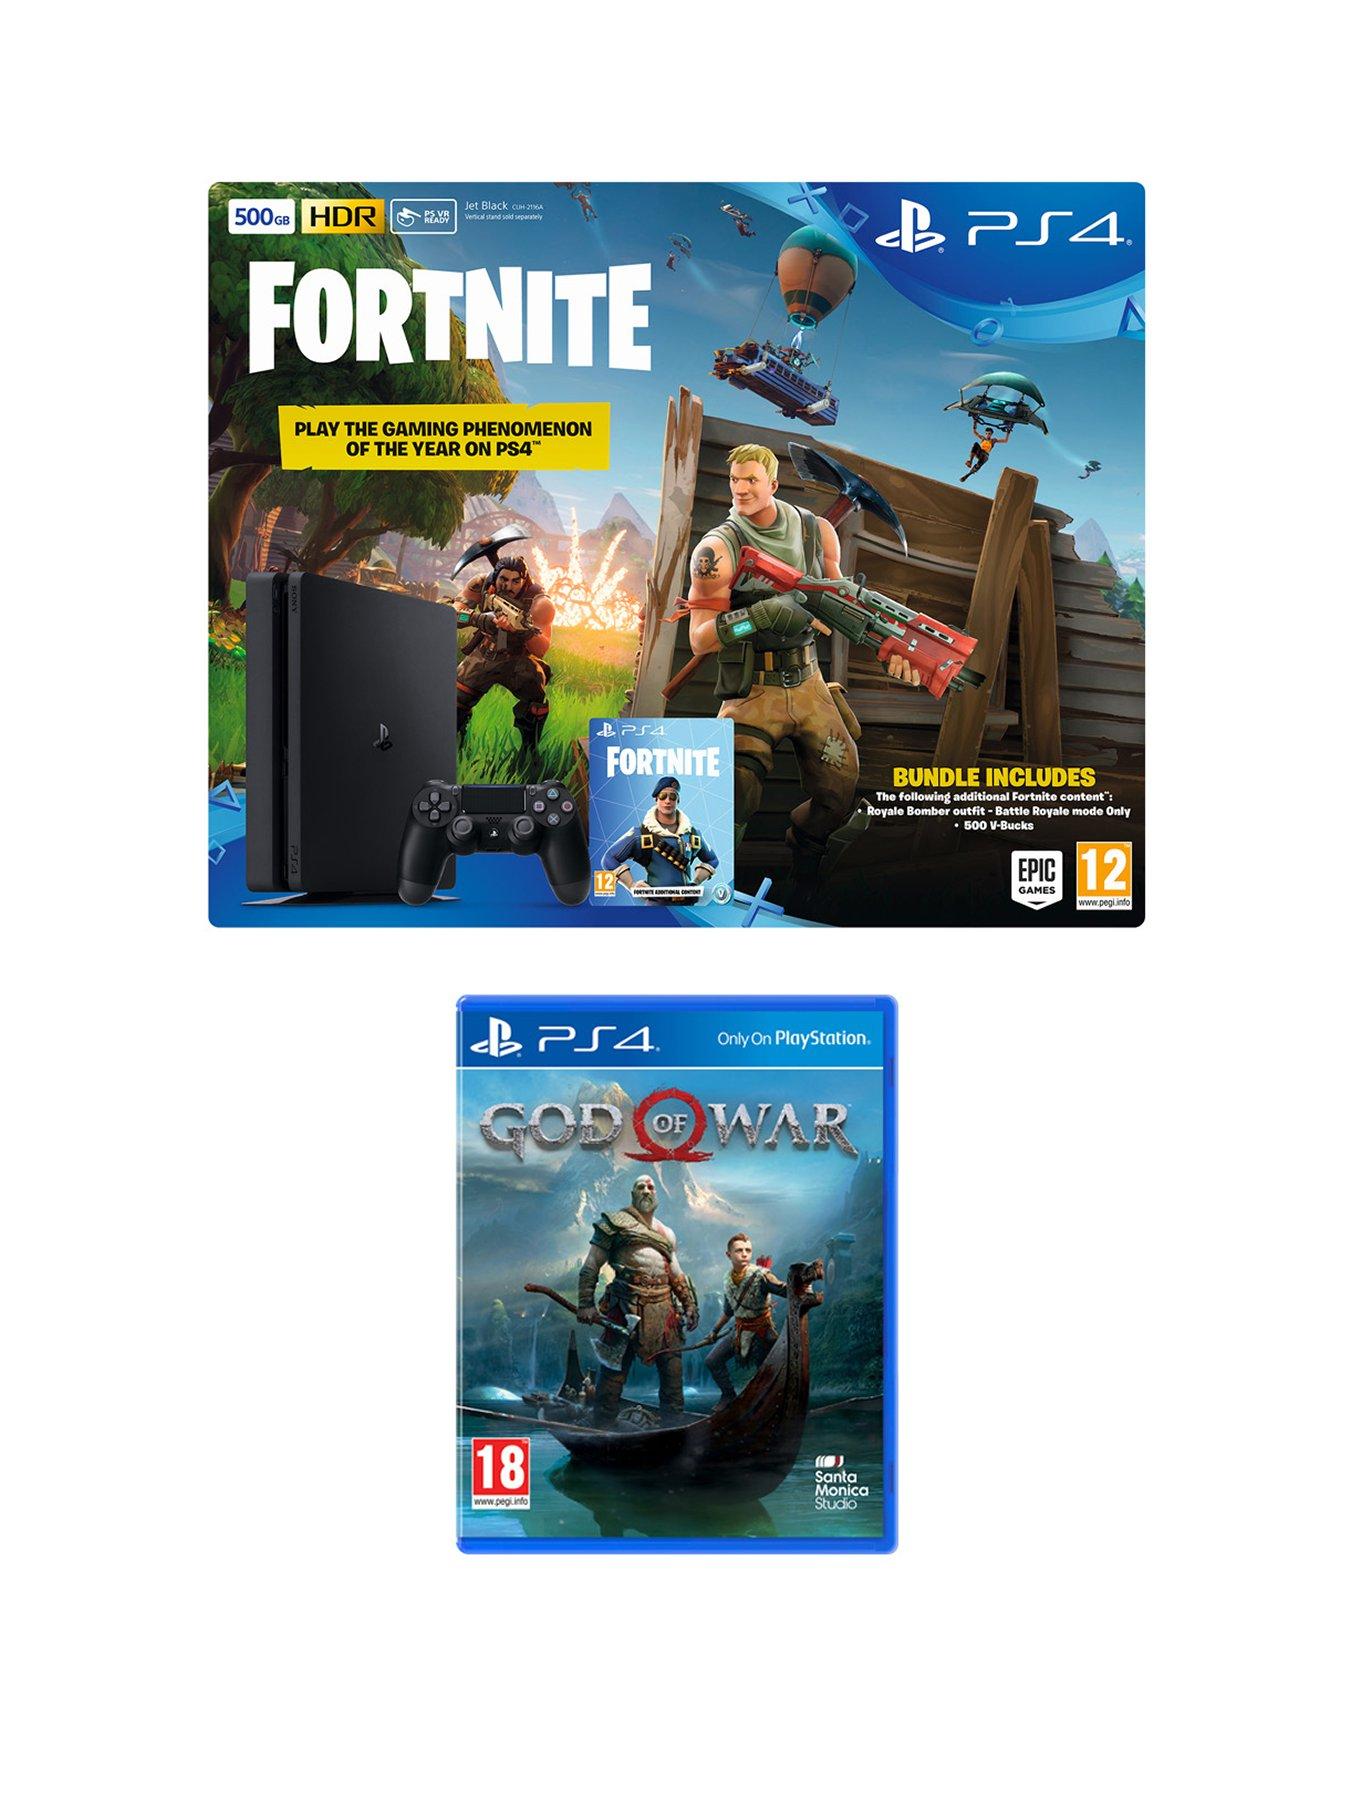 playstation 4 ps4 500gb black console with fortnite royal bomber skin and 500 v bucks with god of war plus optional extras - fortnite v bucks playstation 4